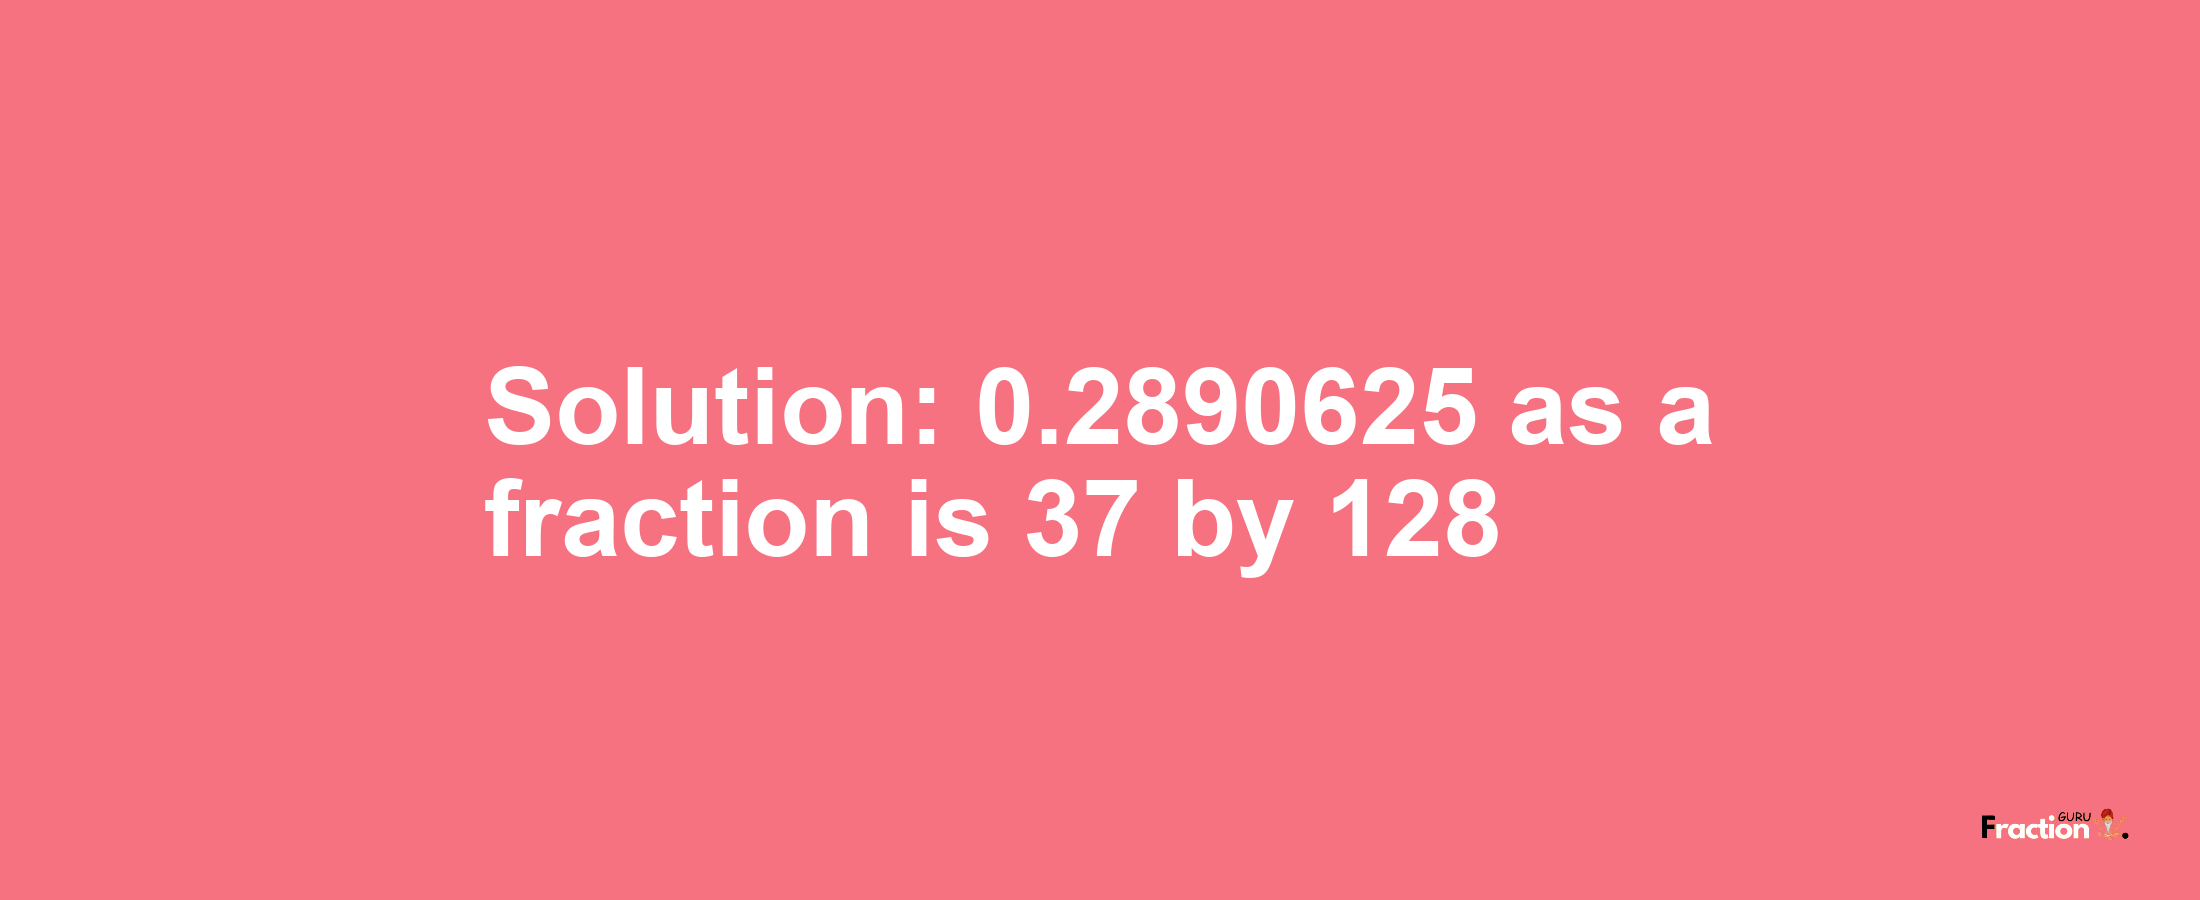 Solution:0.2890625 as a fraction is 37/128